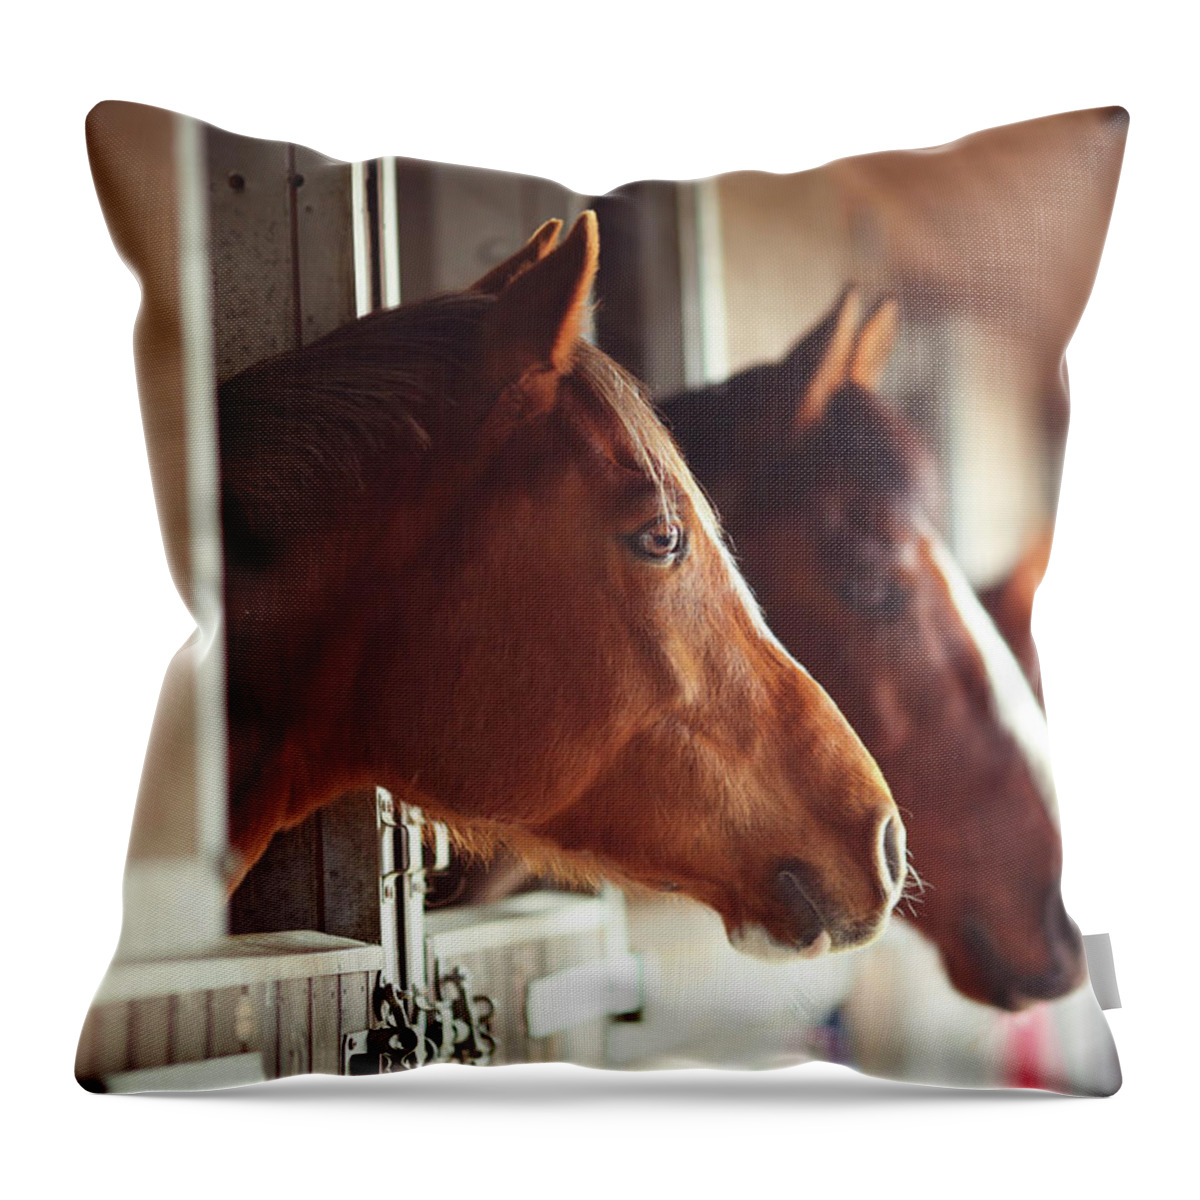 Horse Throw Pillow featuring the photograph Four Horses In Stables by Olivia Bell Photography